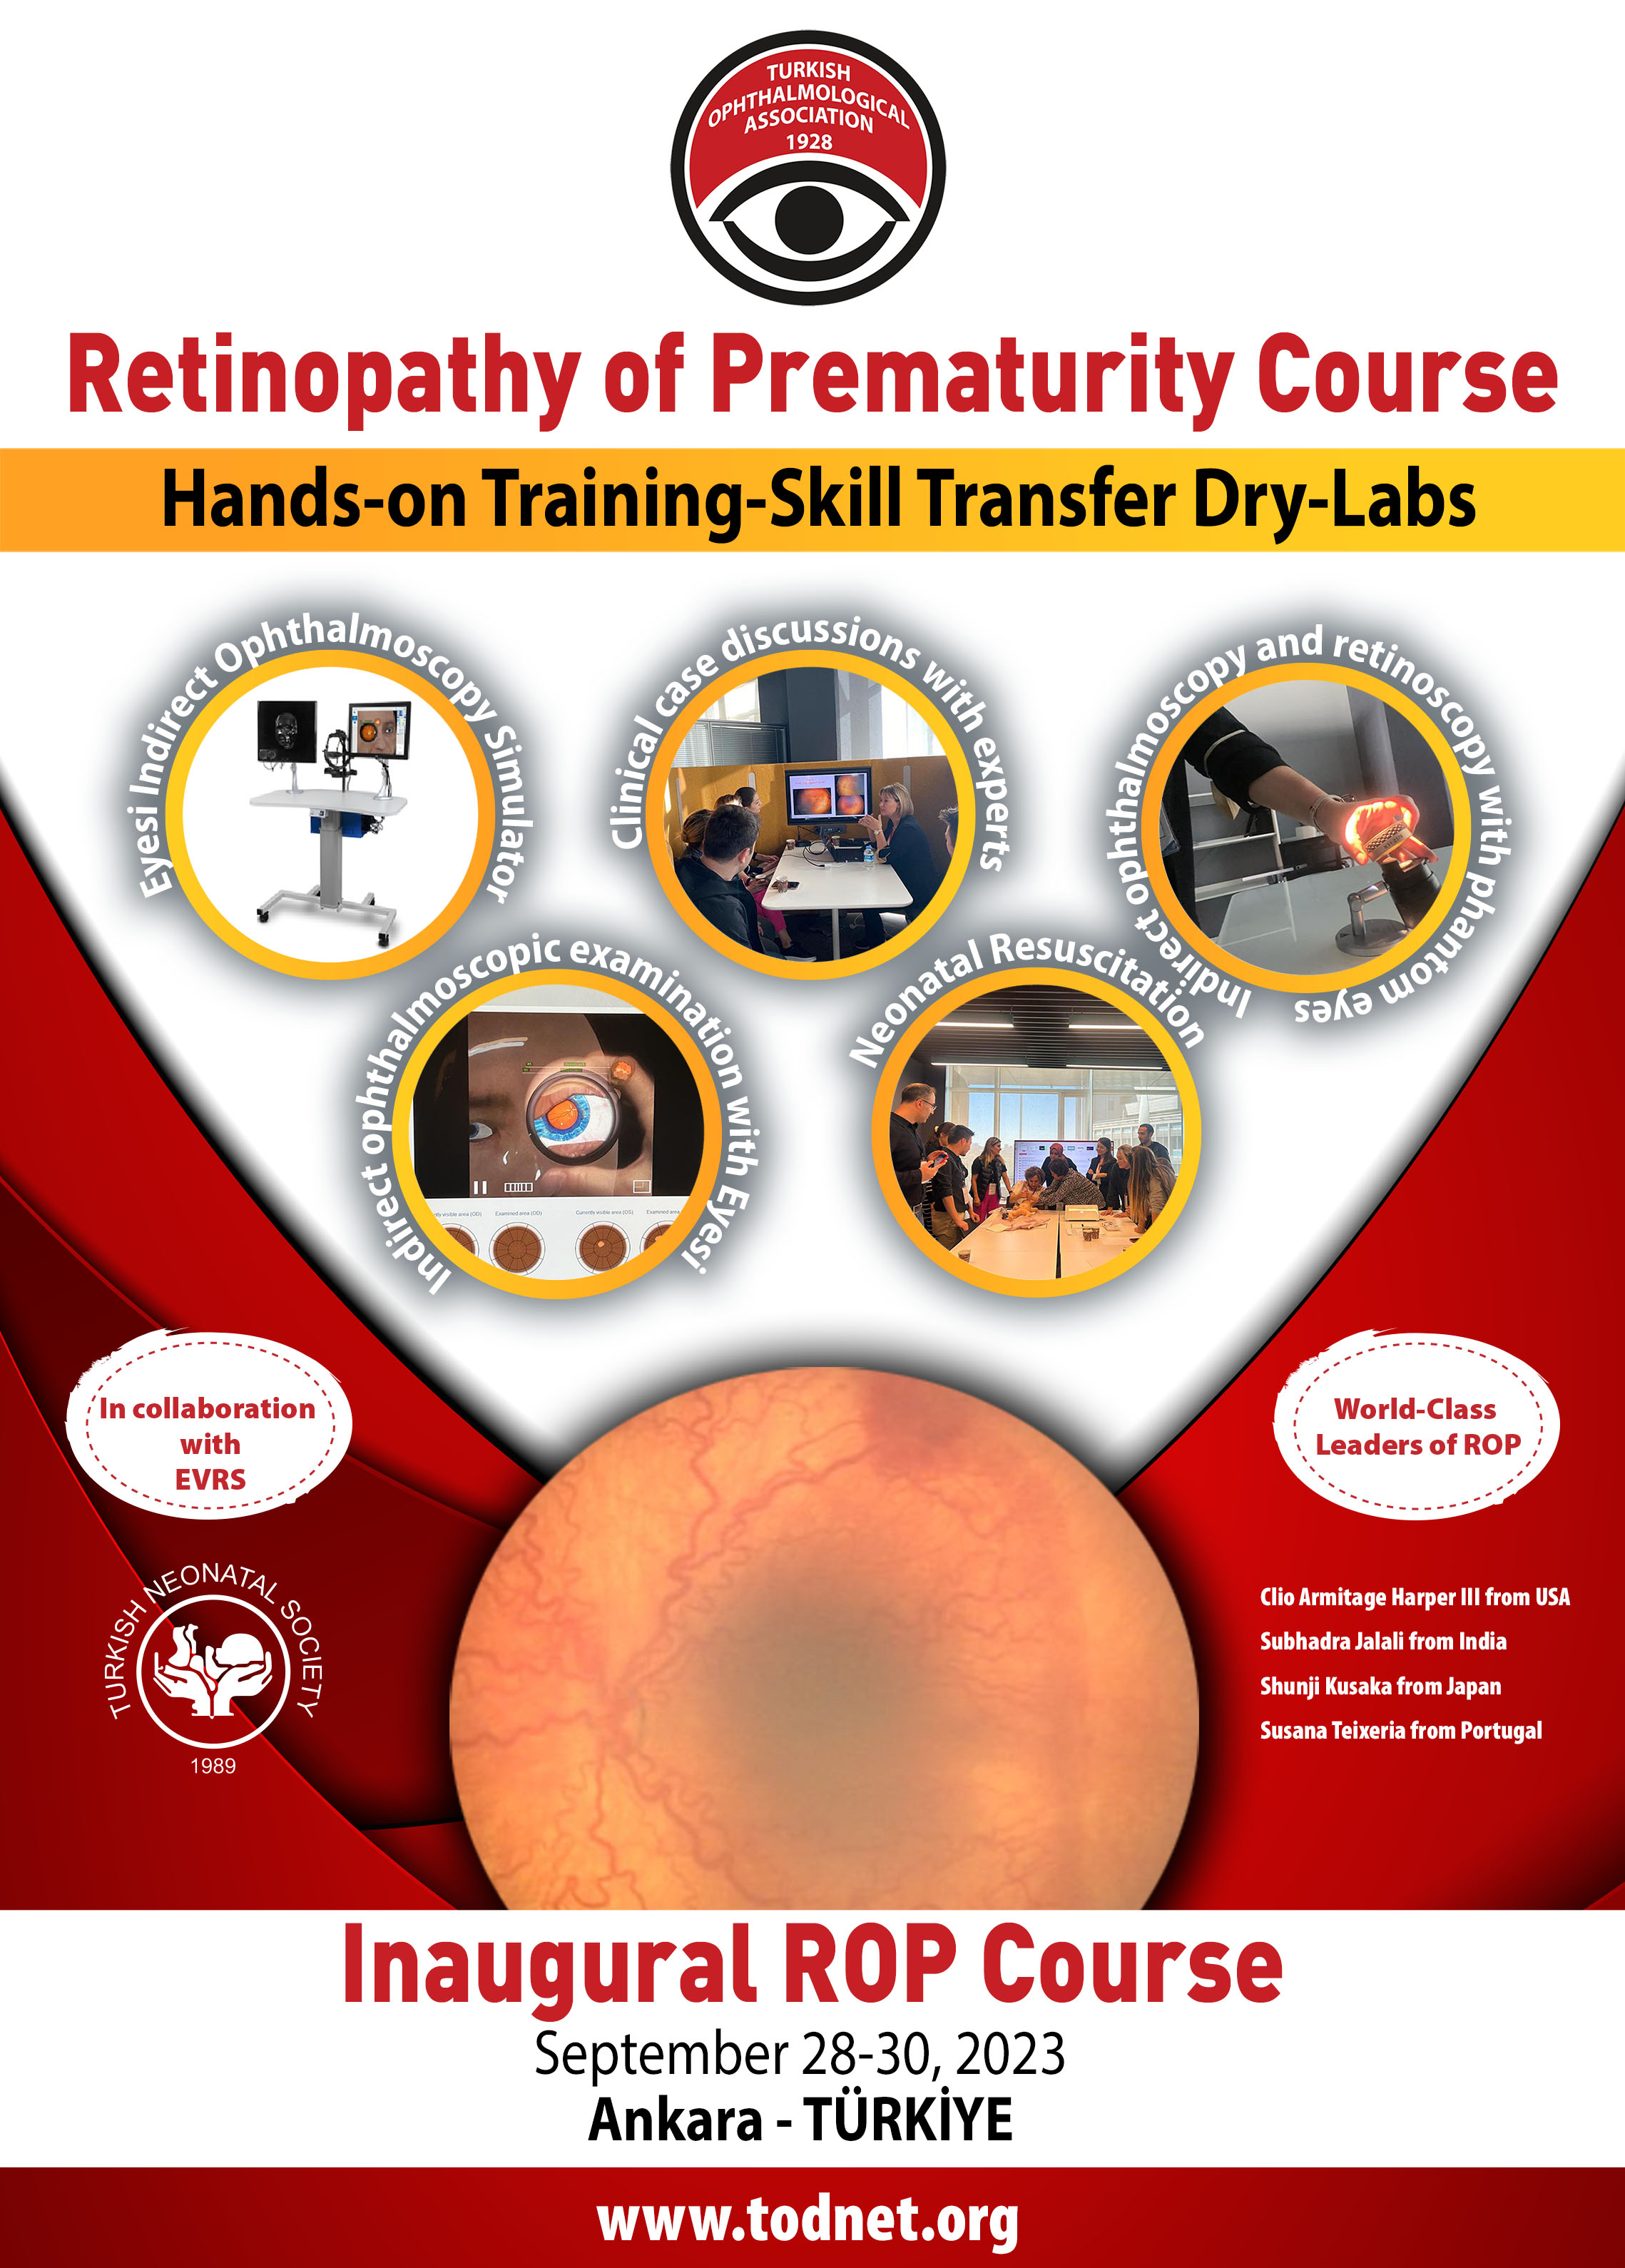 TOA Retinopathy of Prematurity Commission Skill Transfer Course